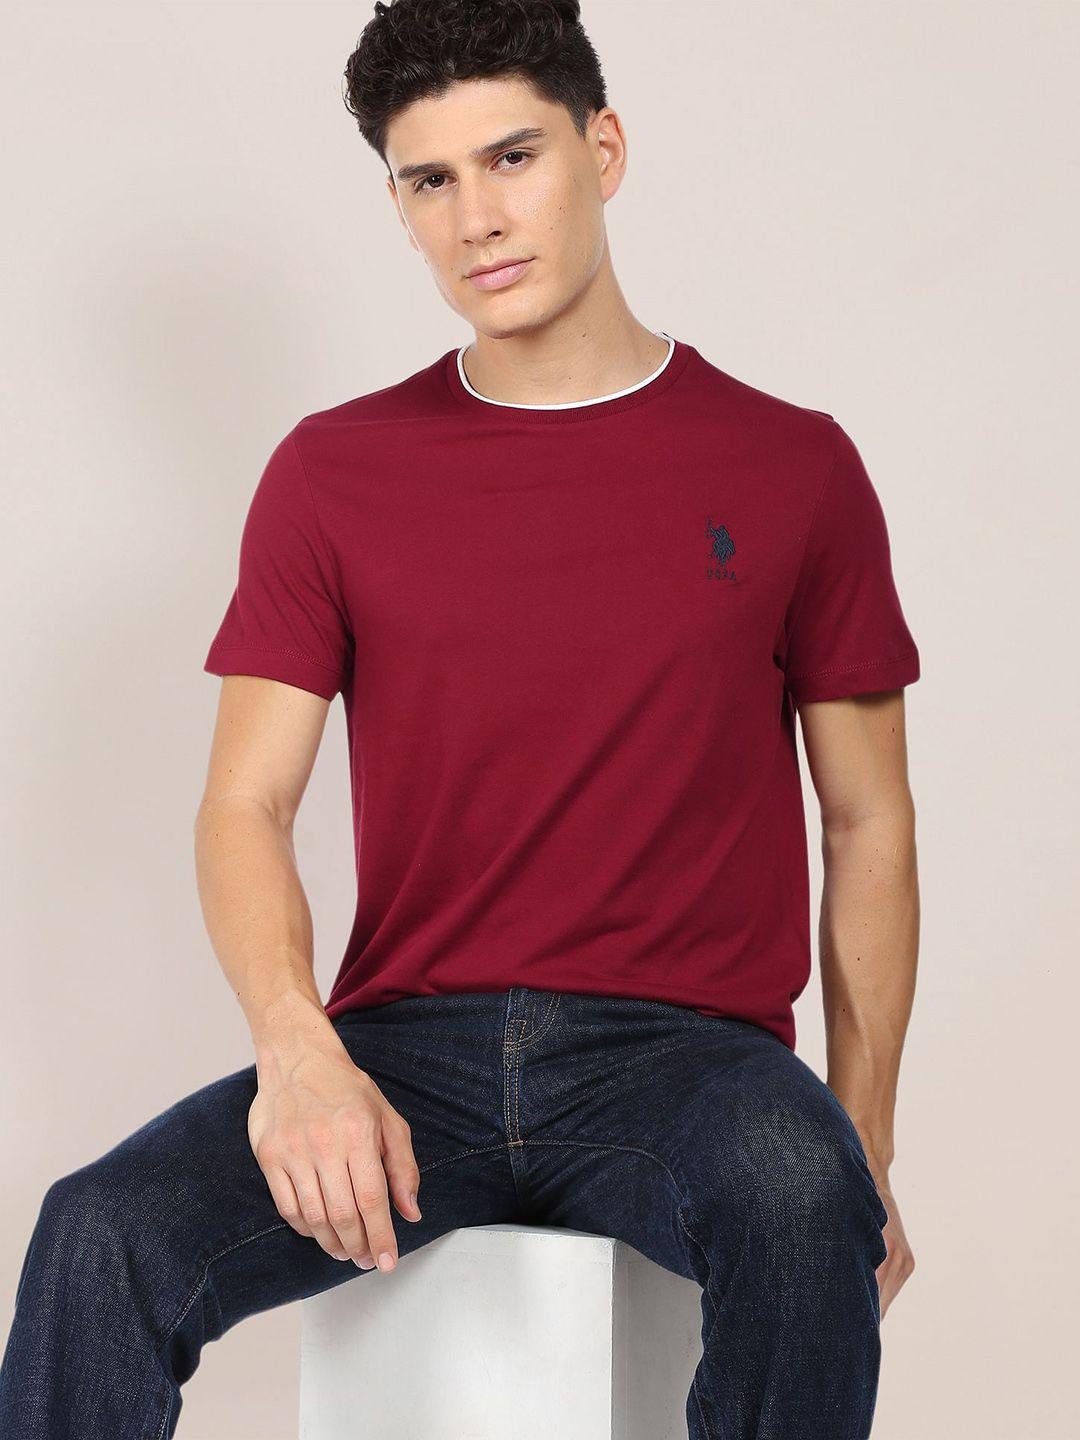 u.s. polo assn. men maroon stretchy tipped cotton t-shirt